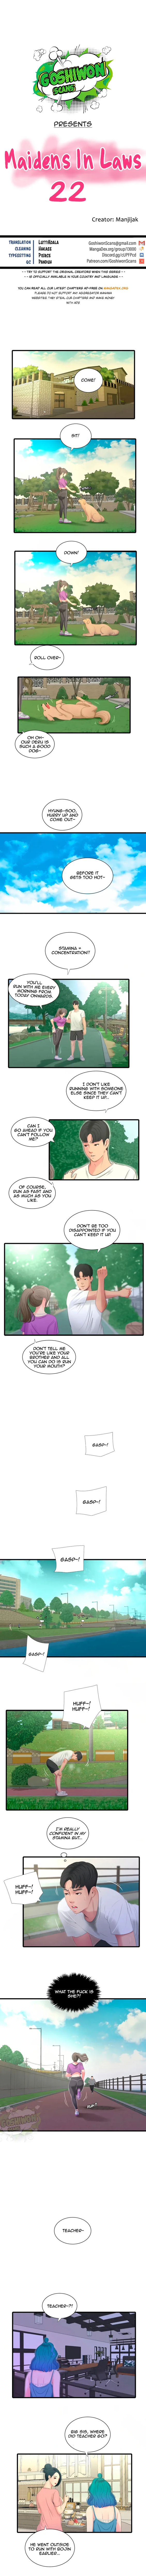 maidens-in-law-chap-22-1